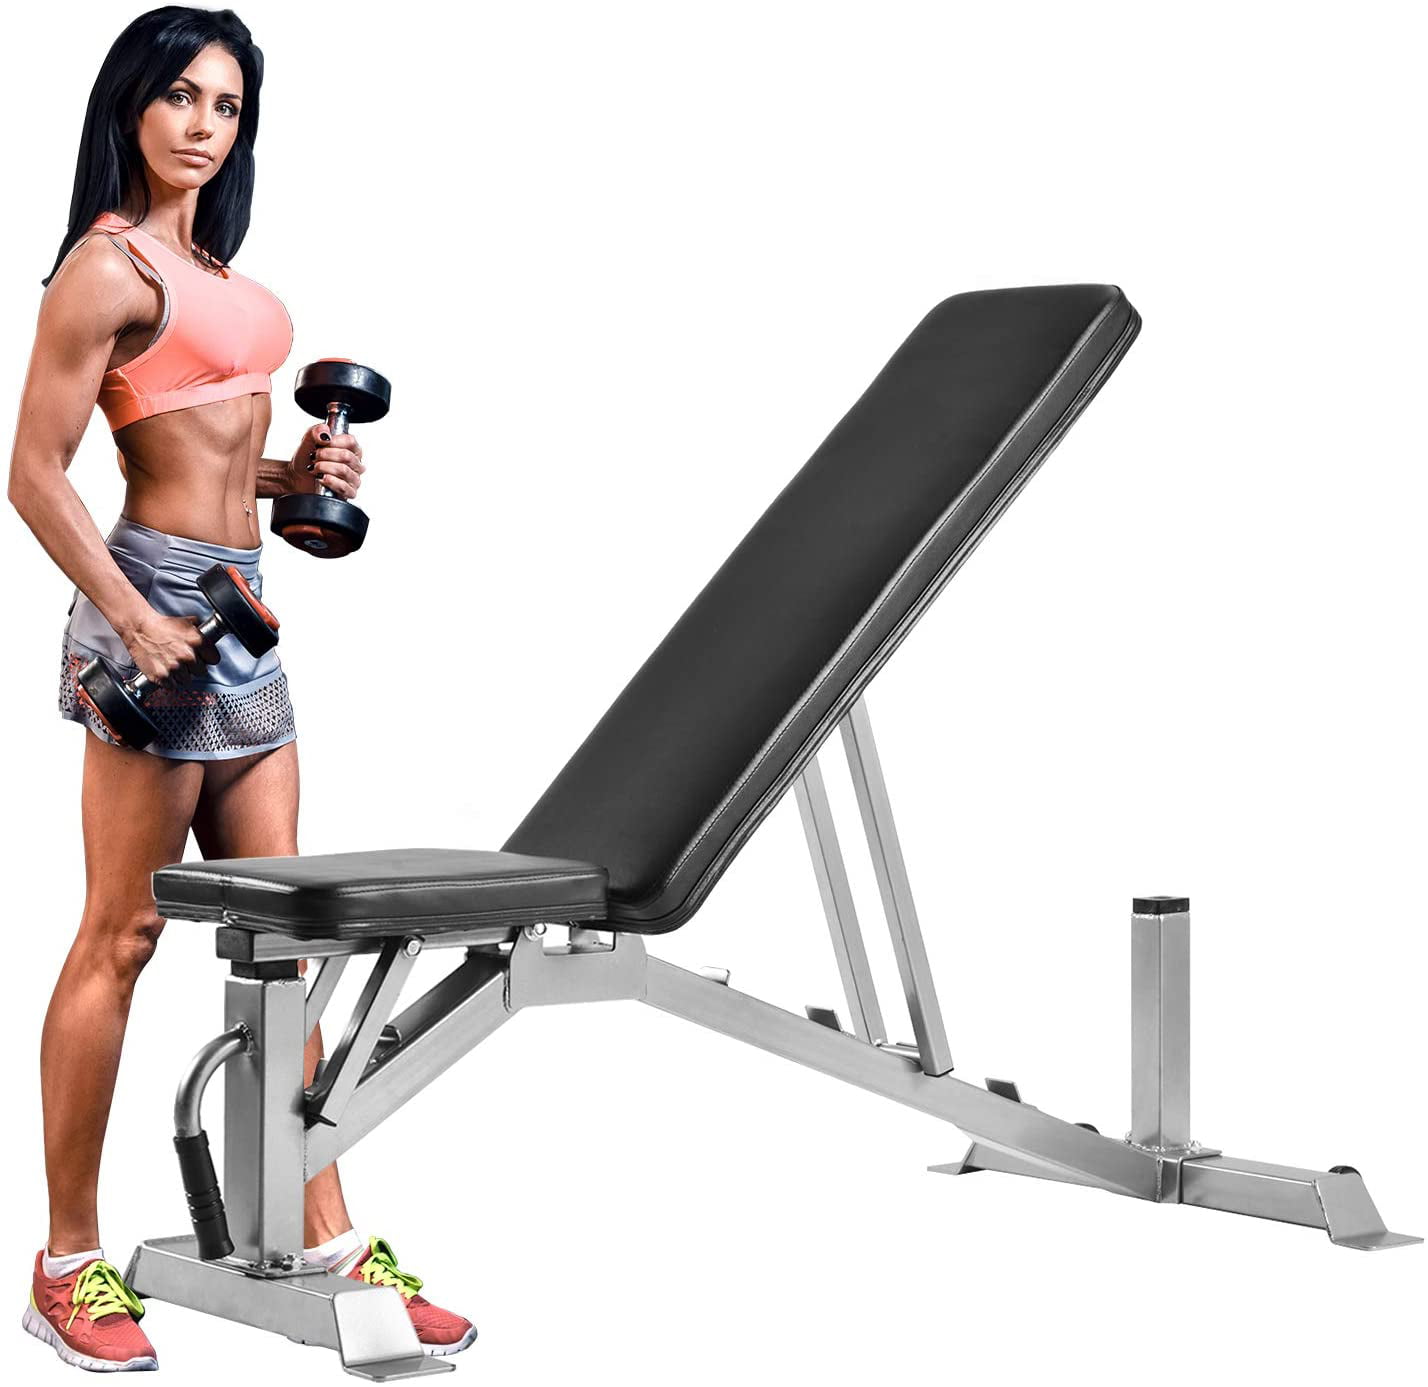 Details about  / Adjustable Utility Bench for Home Gym Workout